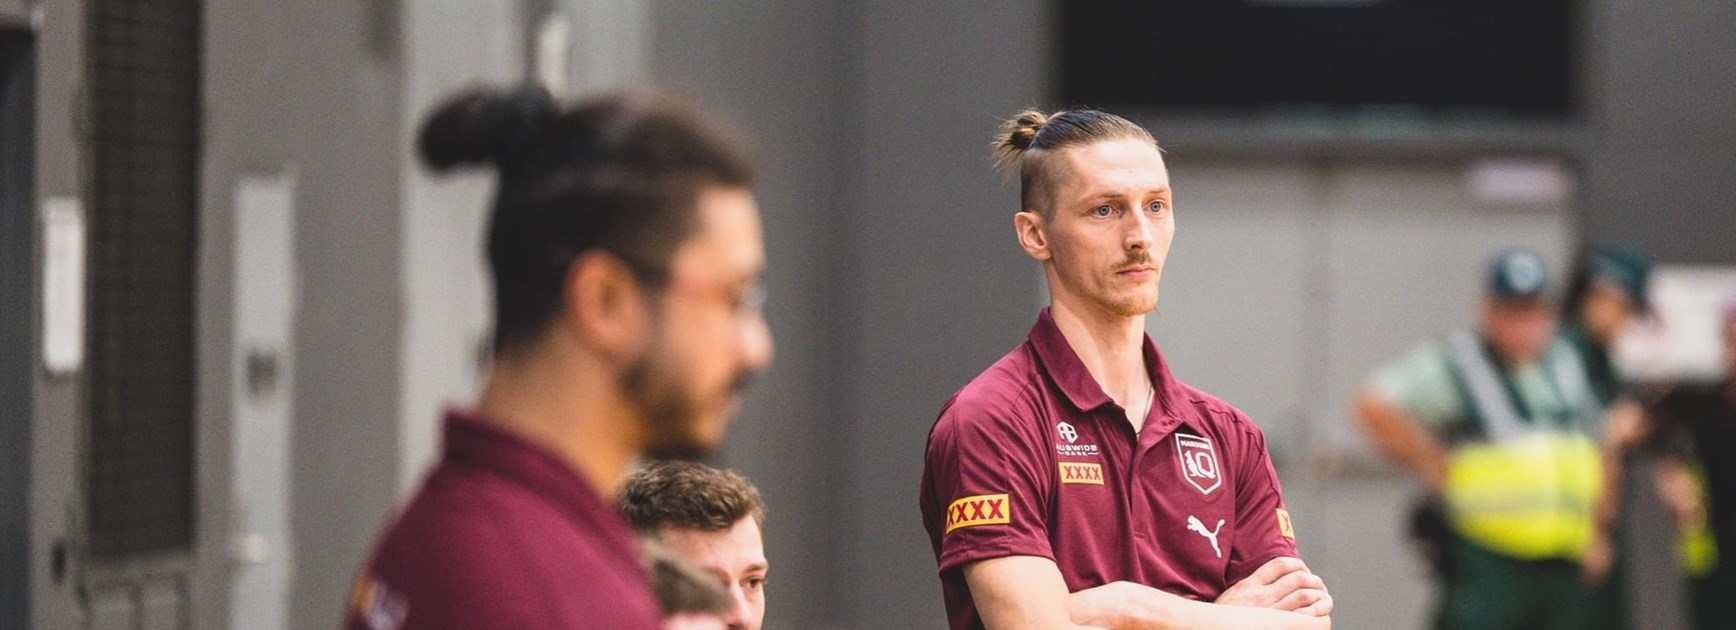 Queenslanders ready to take down coach in Wheelchair Rugby League World Cup